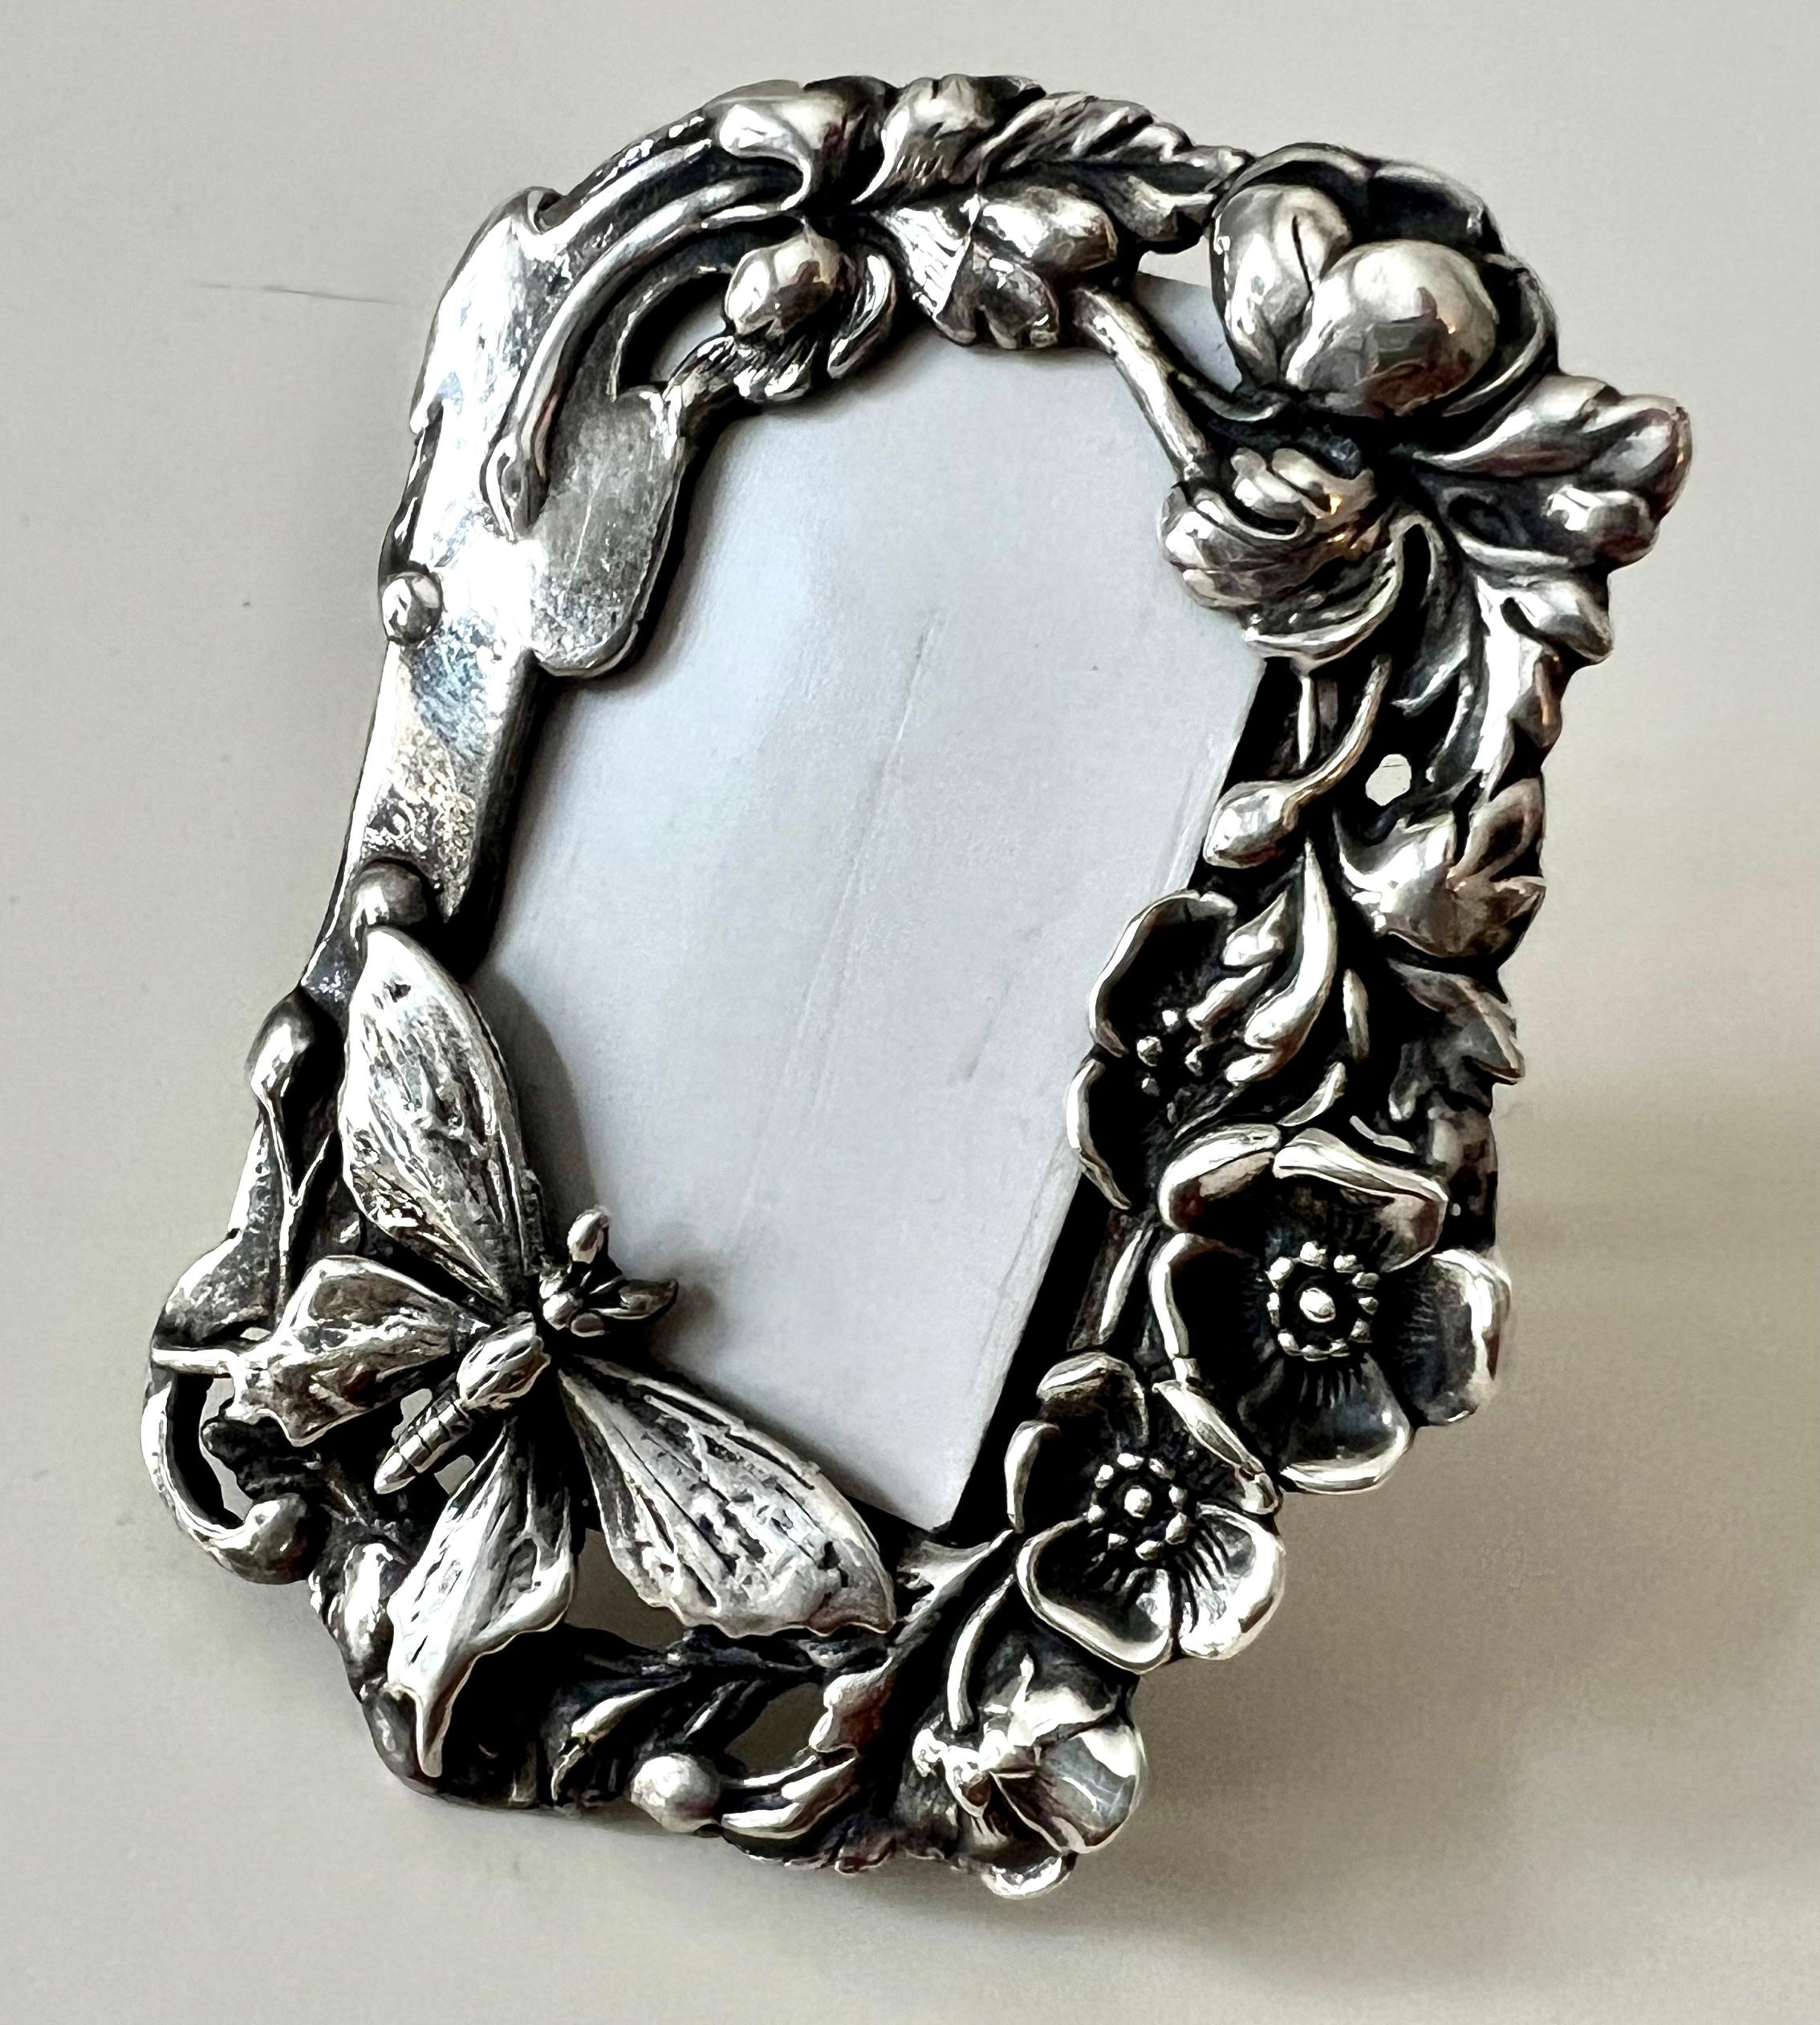 Hand-Crafted Sterling Silver Desk or Bedside Travel Picture Frame with Flowers and Butterfly For Sale